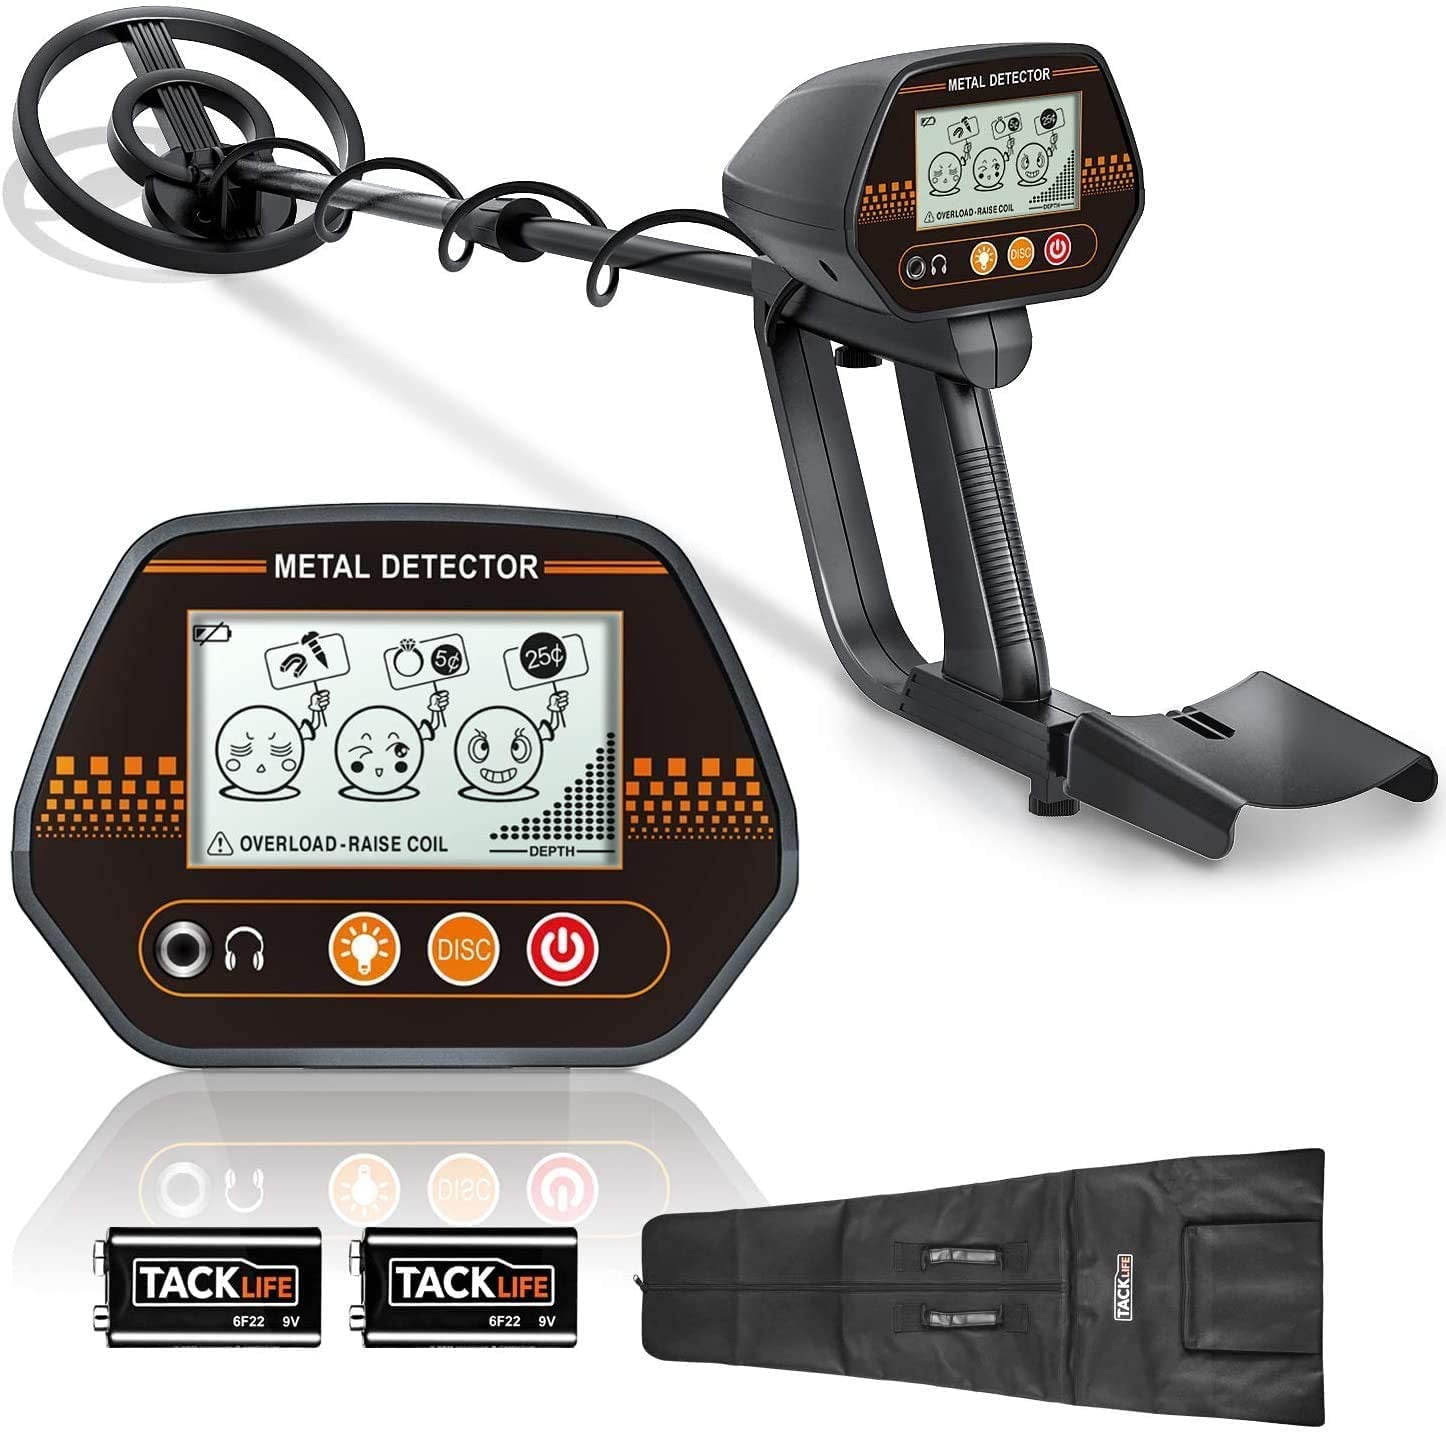 Details about   MD-3010II Metal Detector Deep Sensitive Pinpoint Gold Digger Hunt LCD Waterproof 